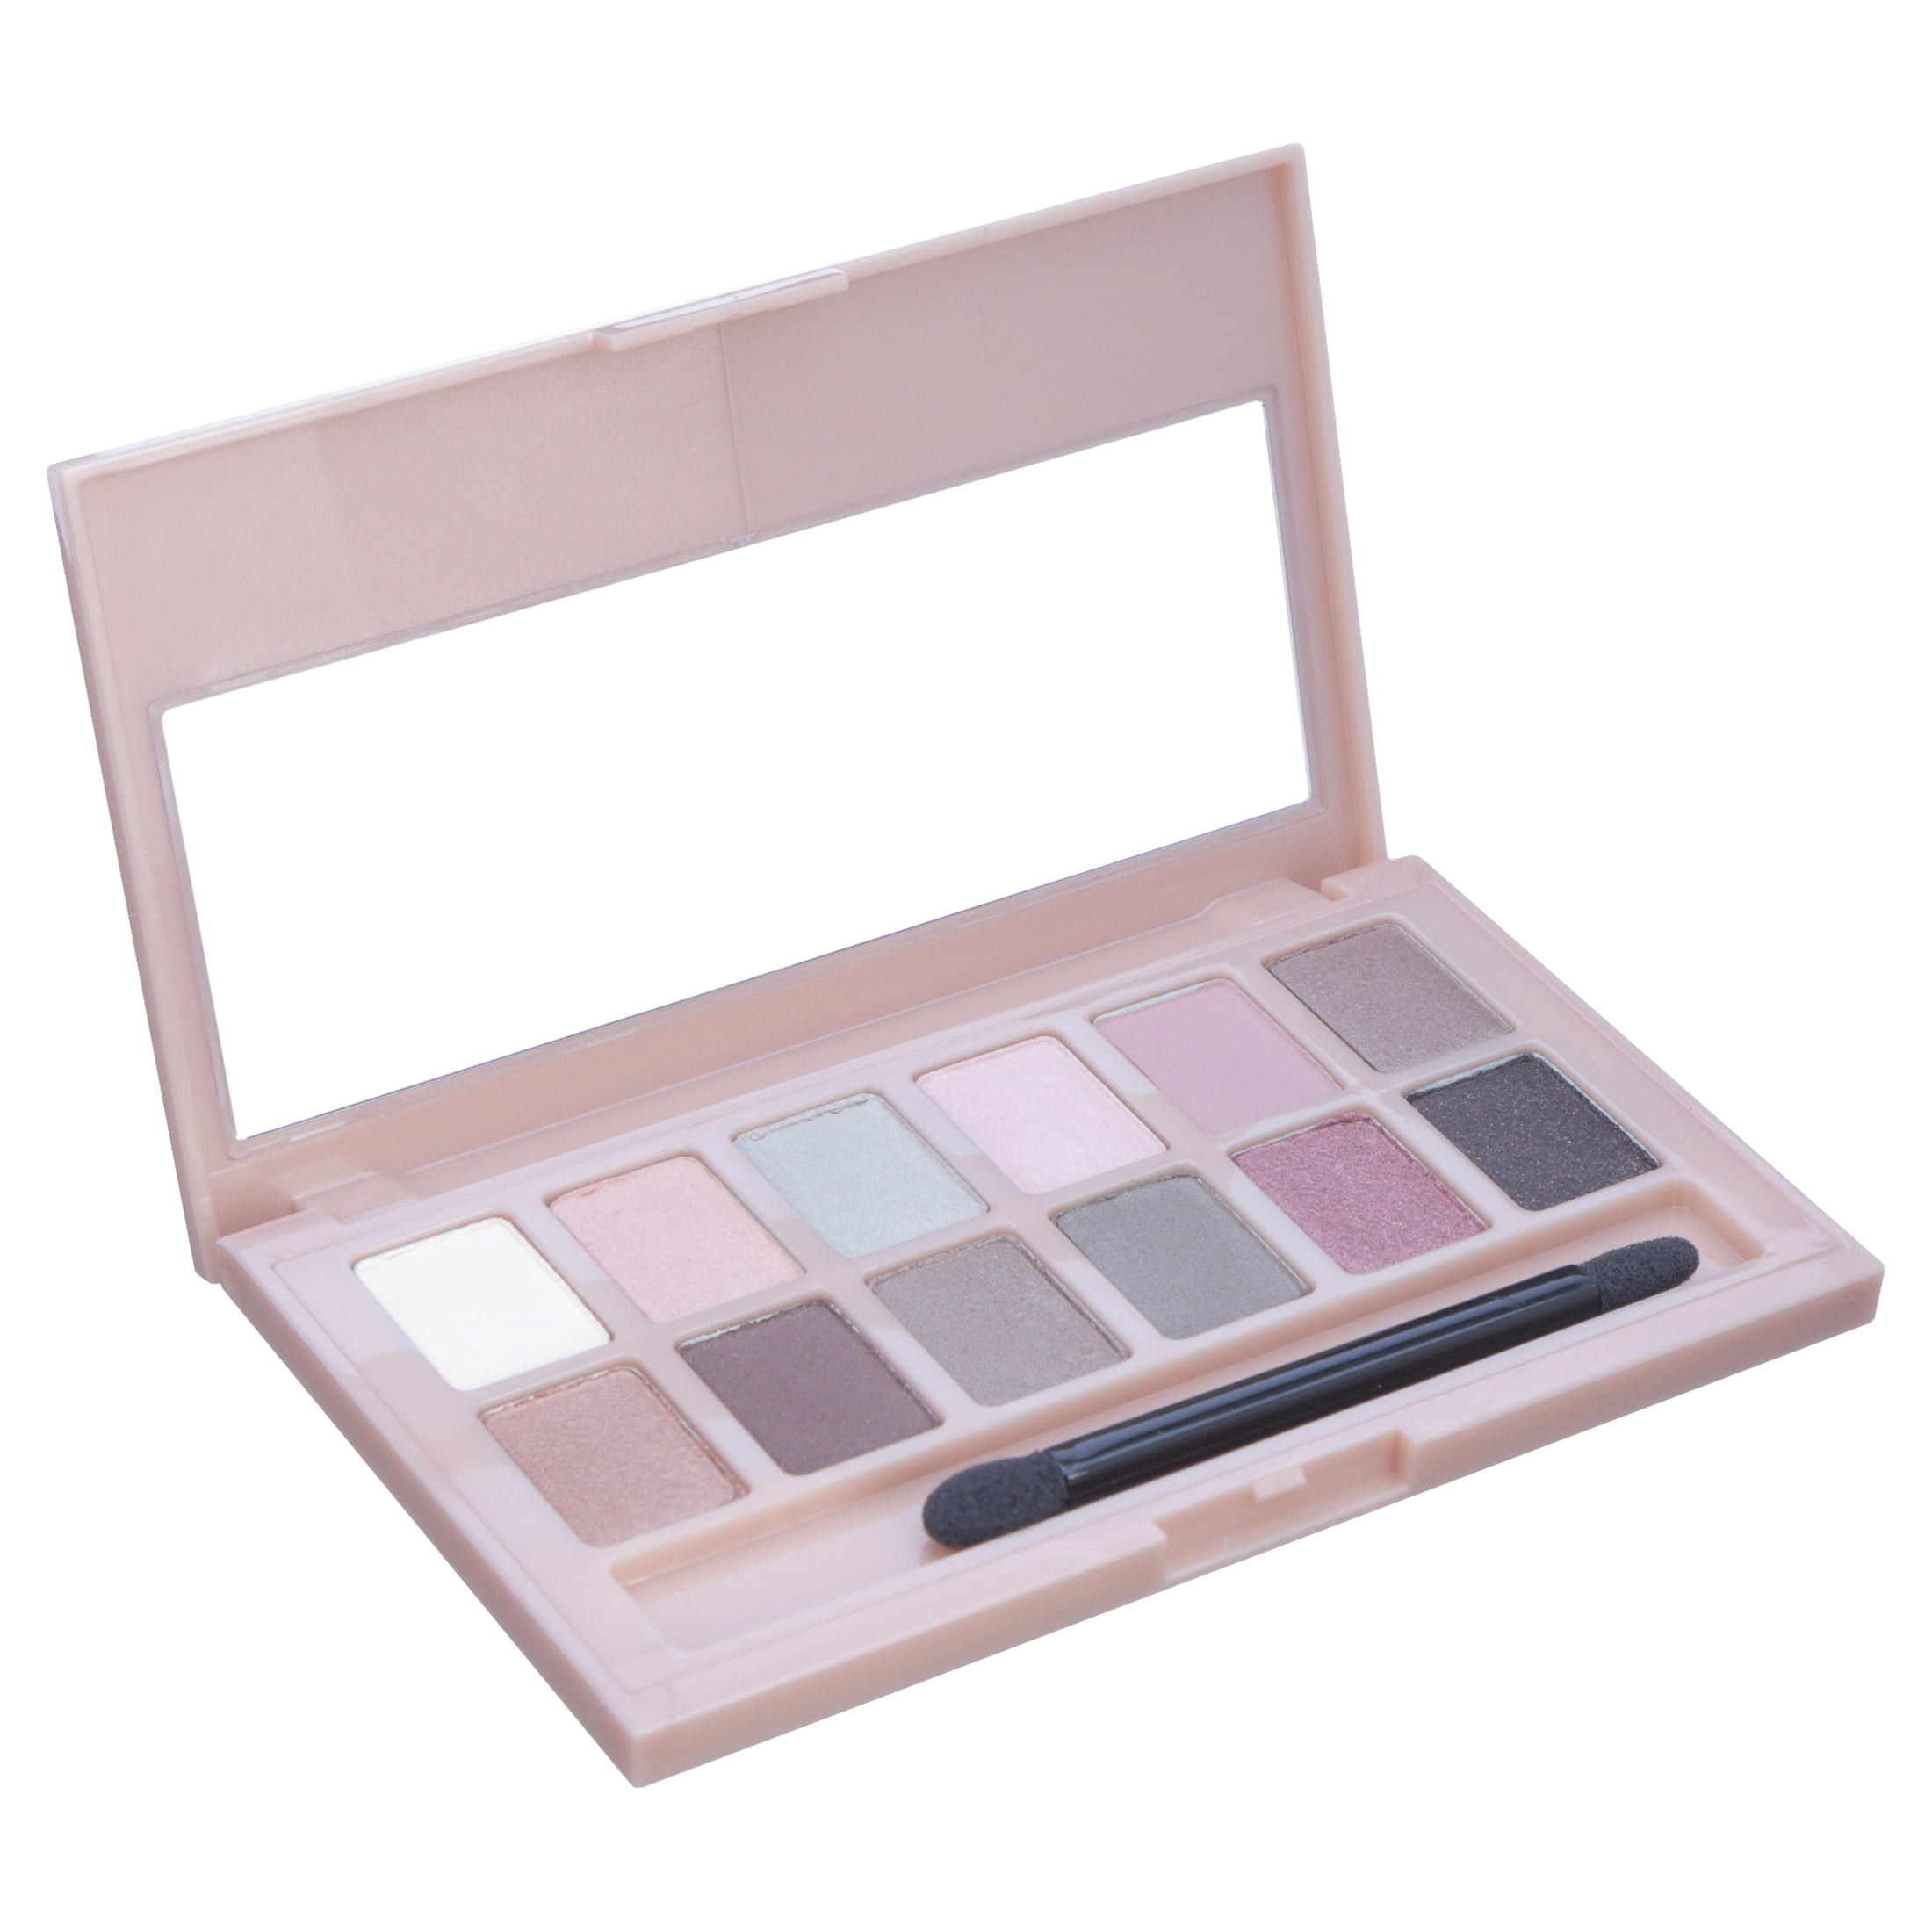 Eyeshadow Nudes The Maybelline Palette Blushed